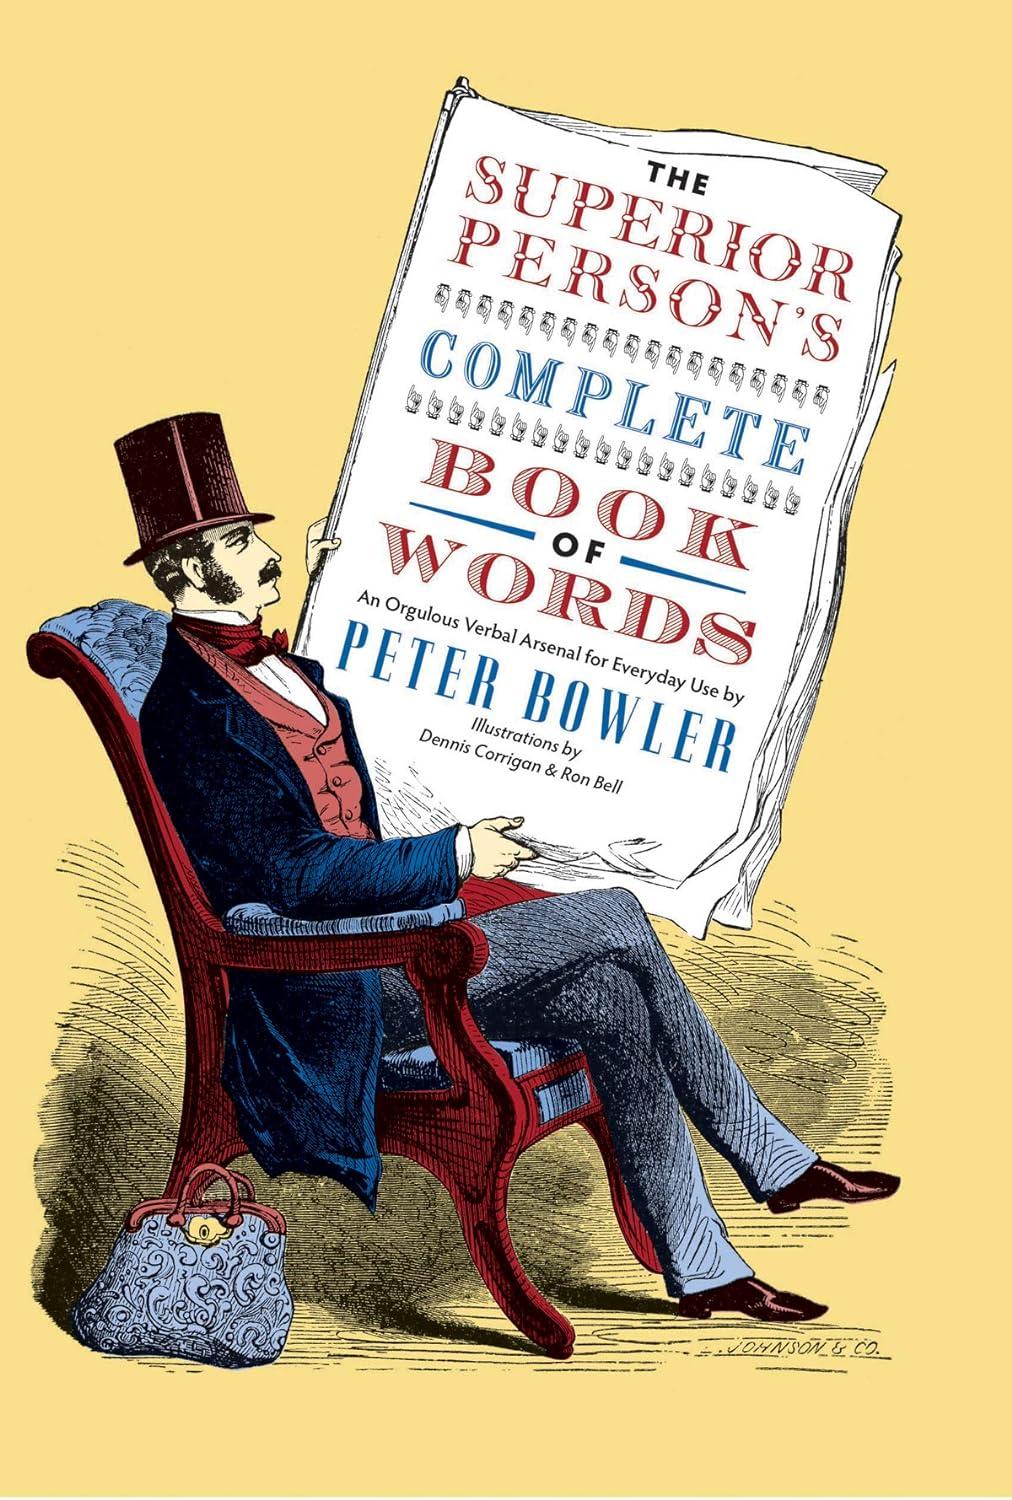  Cover of the 2016 paperback "The Superior Person's Complete Book of Words" by Peter Bowler.